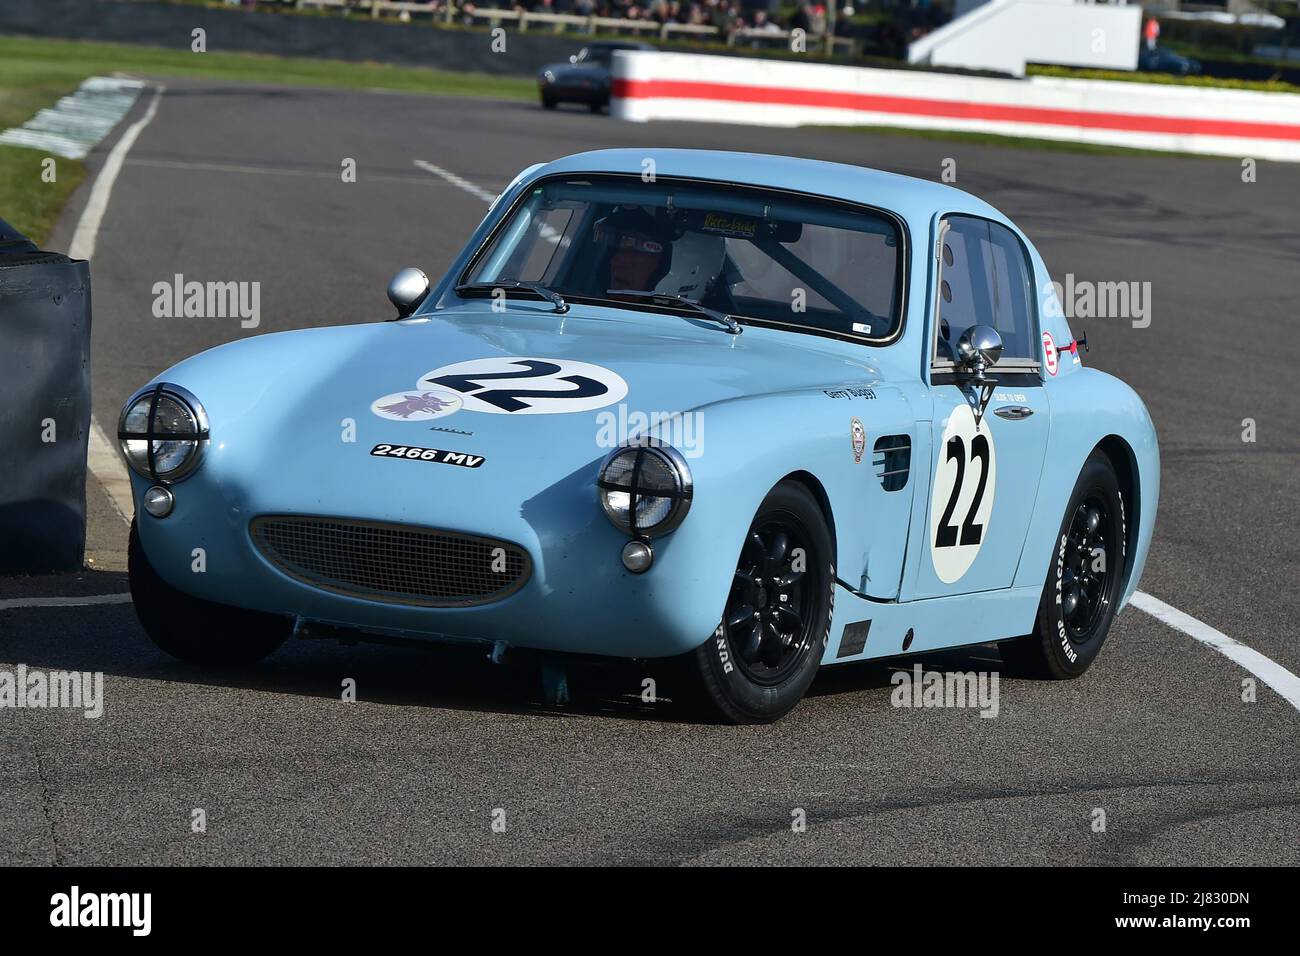 Gerry Buggy, Austin Healey Sebring Sprite, Weslake Cup, a single driver twenty minute race for Sports and GT cars with a BMC ‘A’ engine that raced in Stock Photo